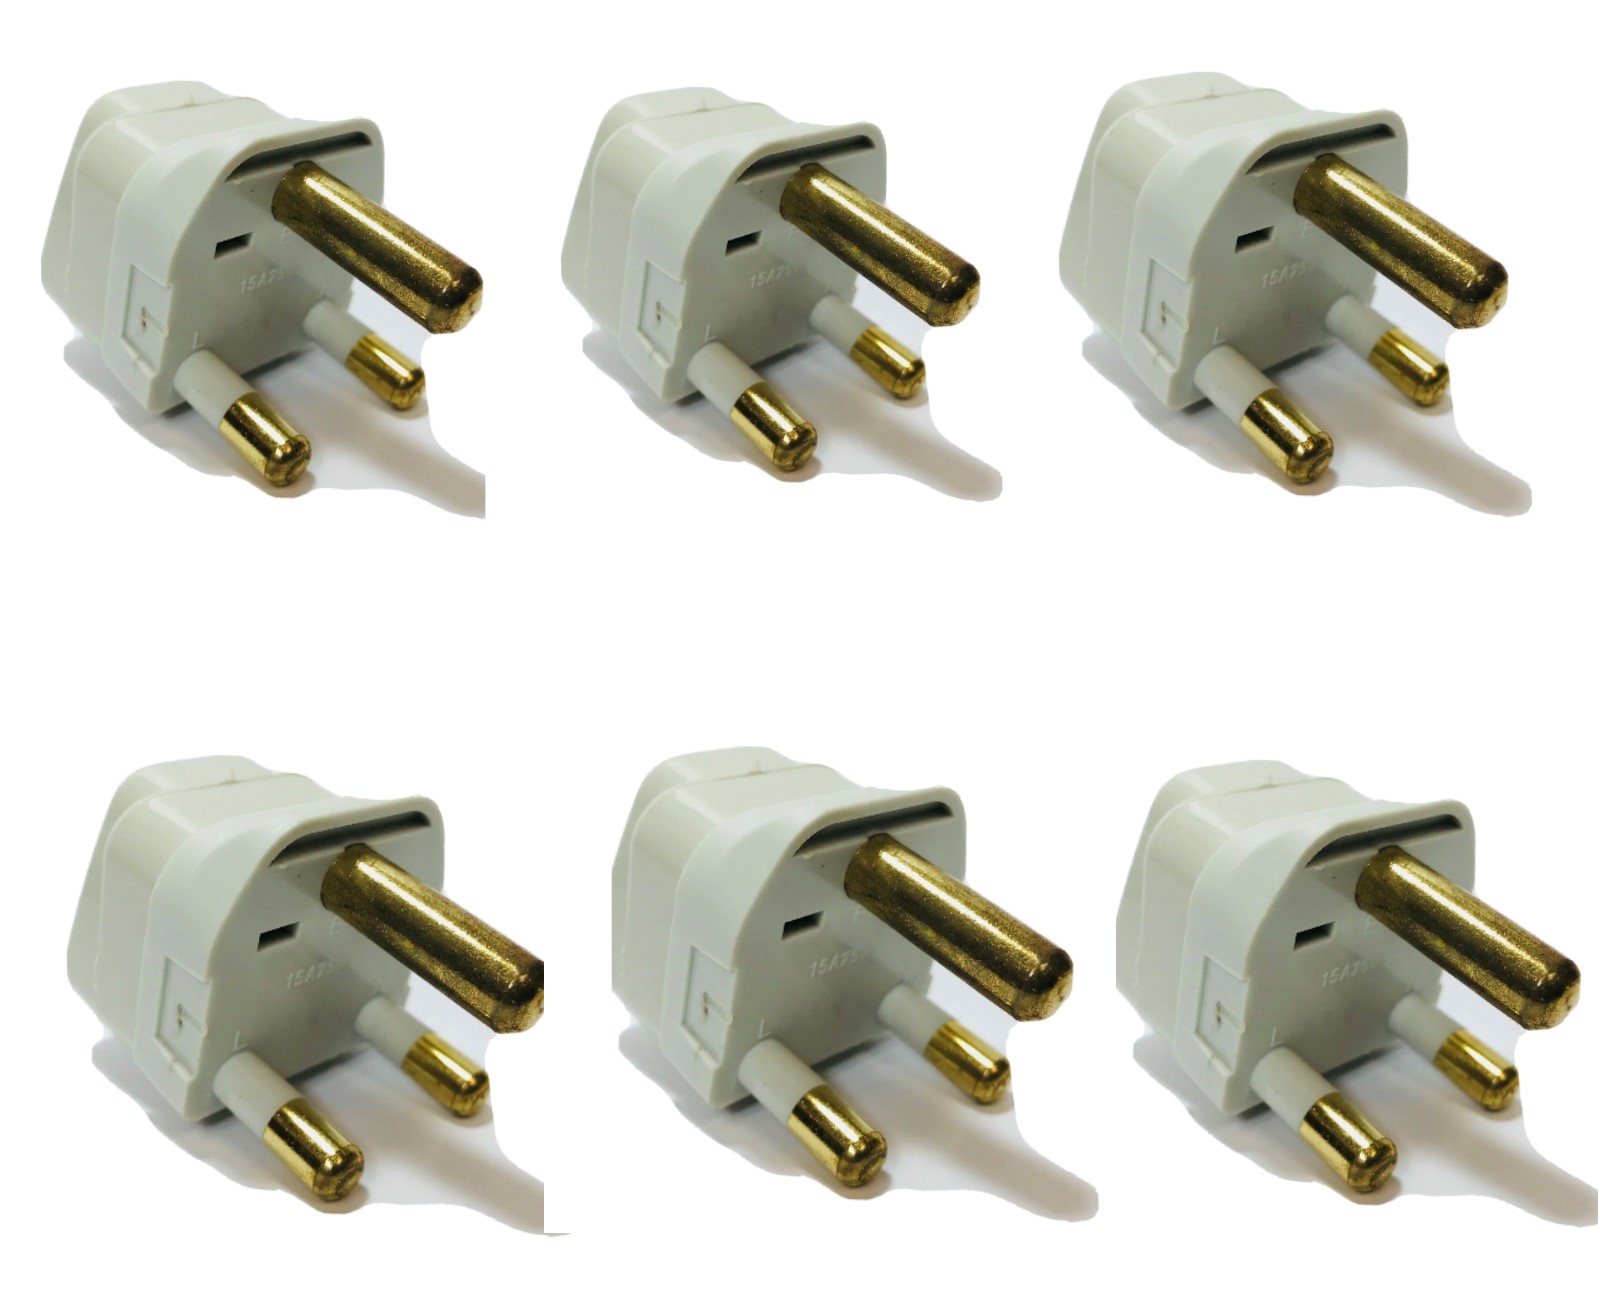 Type M 6-PK Simran SS-415SA South Africa Universal Grounded Plug Adapter S. African 